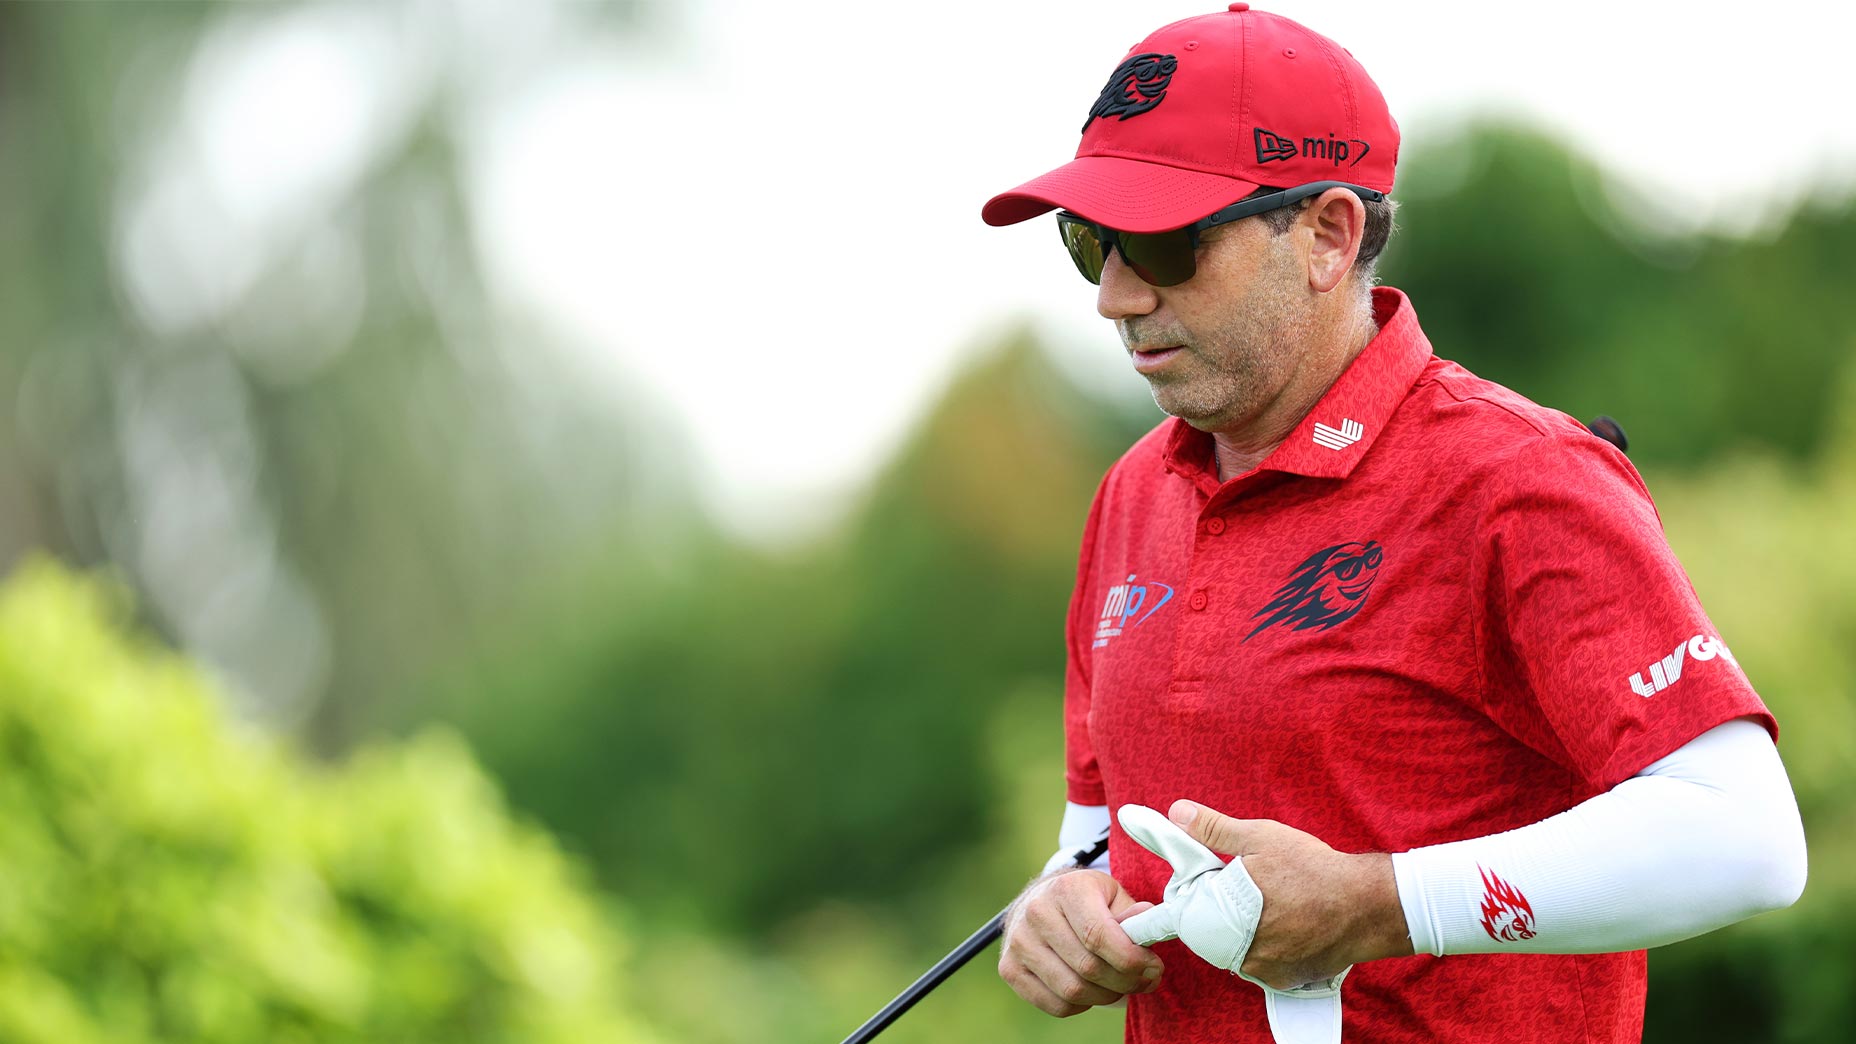 sergio garcia pulls glove off of hand in red shirt and hat